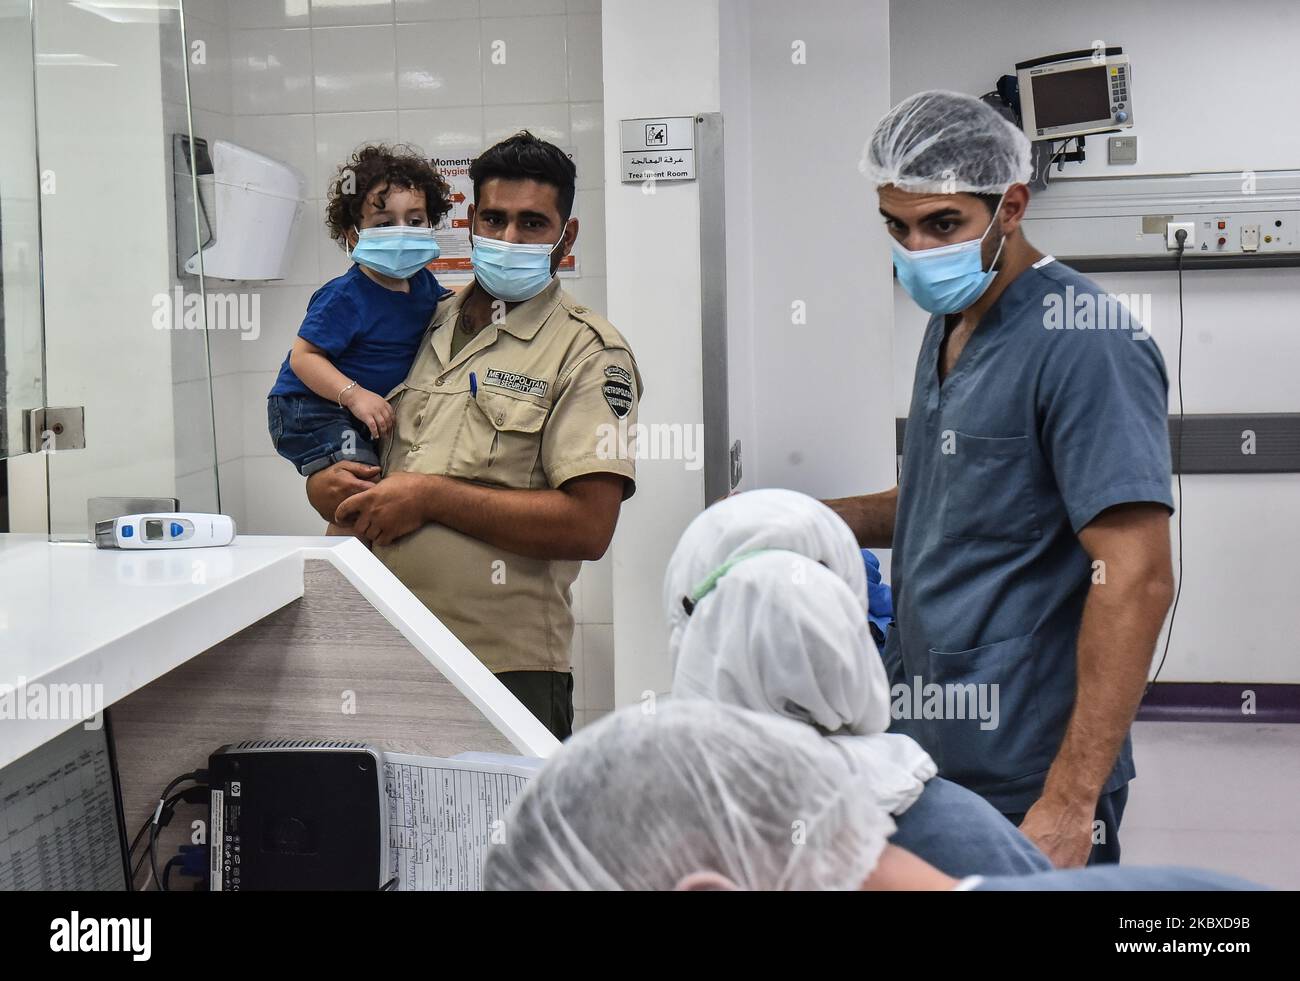 People at Rafic Hariri University Hospital in Beirut, Lebanon, on August 11, 2020 during the COVID-19 lockdown. Lebanon started a two-week coronavirus lockdown on Friday, as the country’s health minister described the situation as “dangerous and sensitive”. (Photo by STR/NurPhoto) Stock Photo